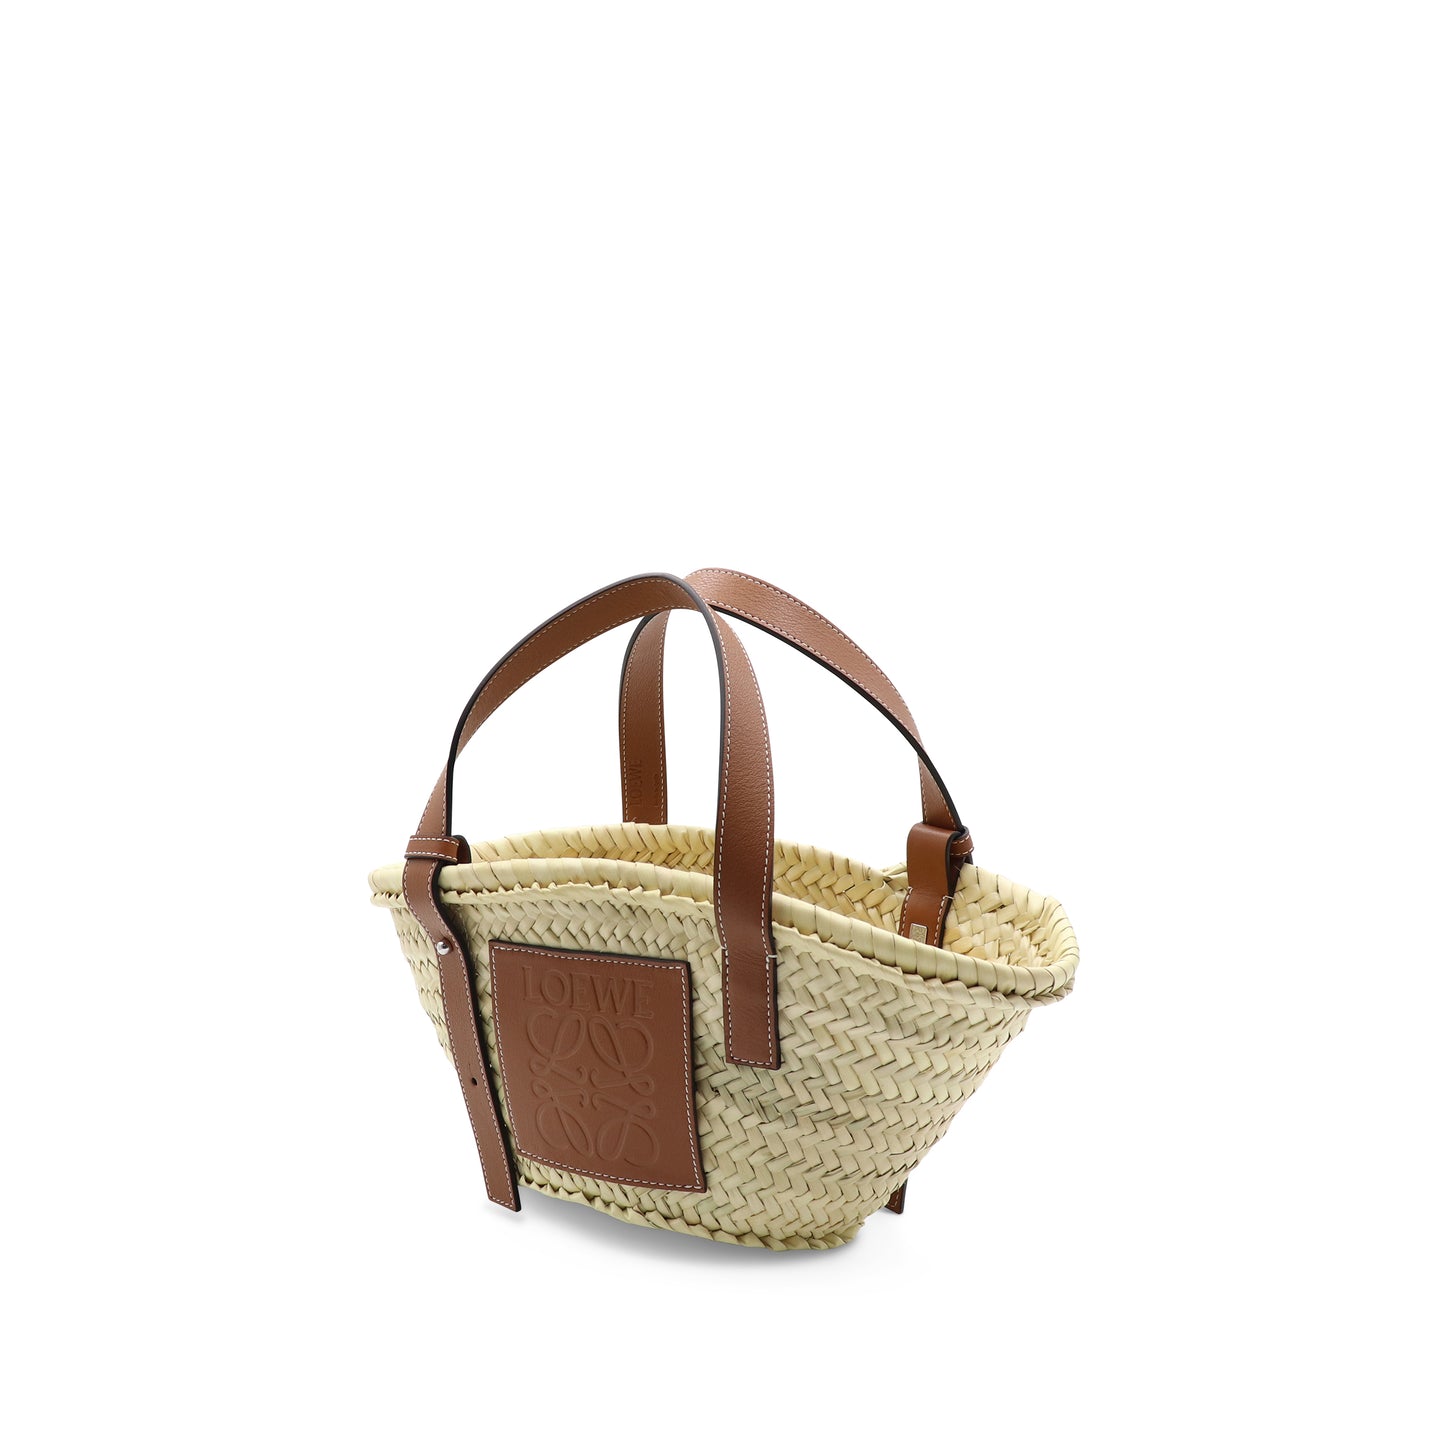 Small Basket Bag in Palm Leaf and Calfskin in Natural/Tan